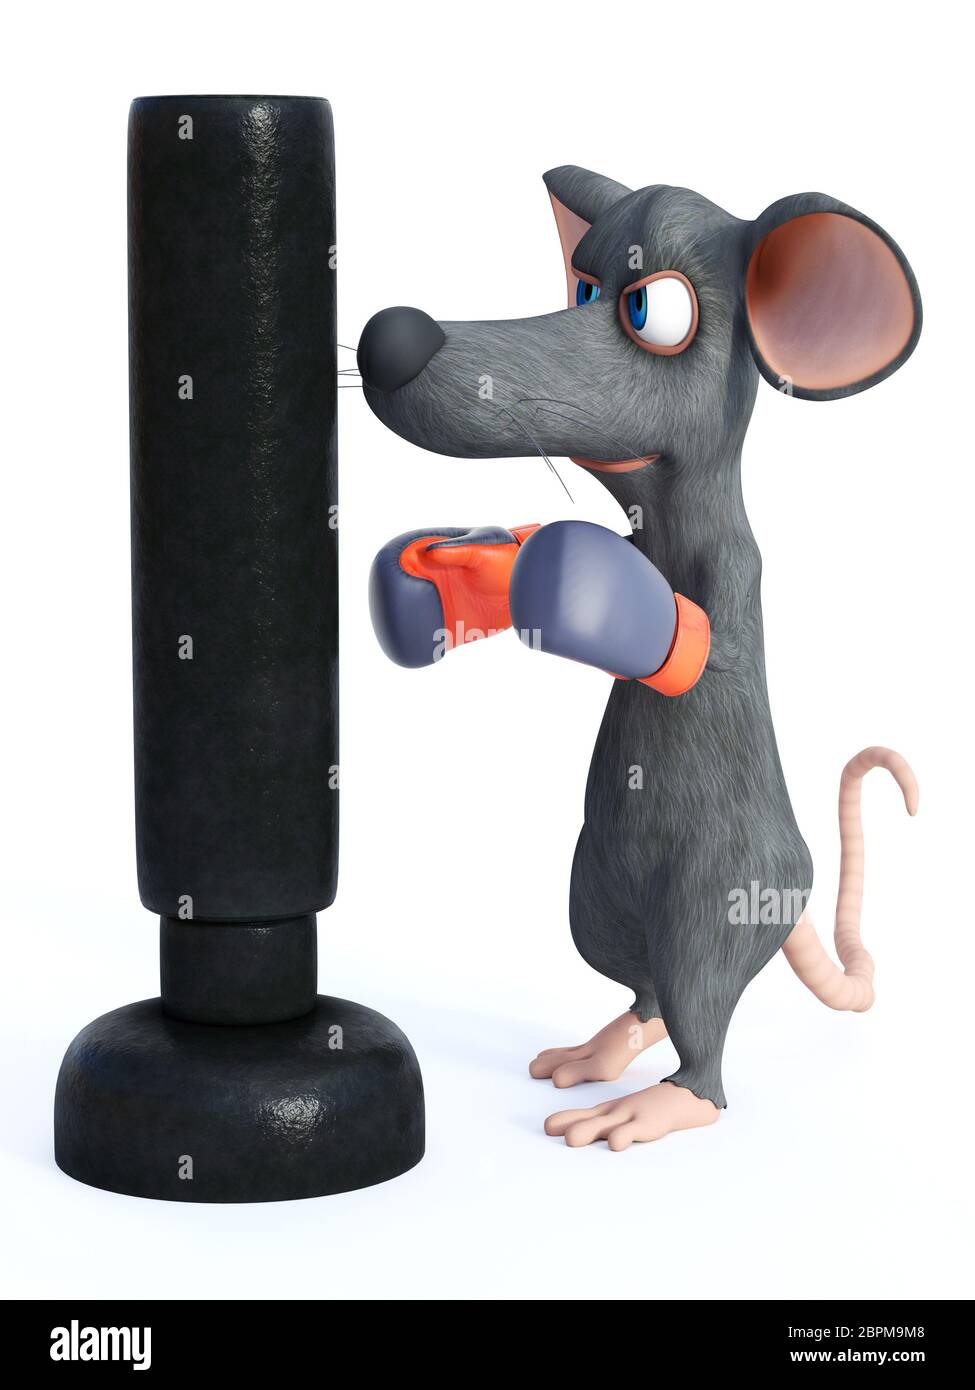 3D rendering of a cute cartoon mouse wearing boxing gloves and punching a heavy bag. White background. Stock Photo